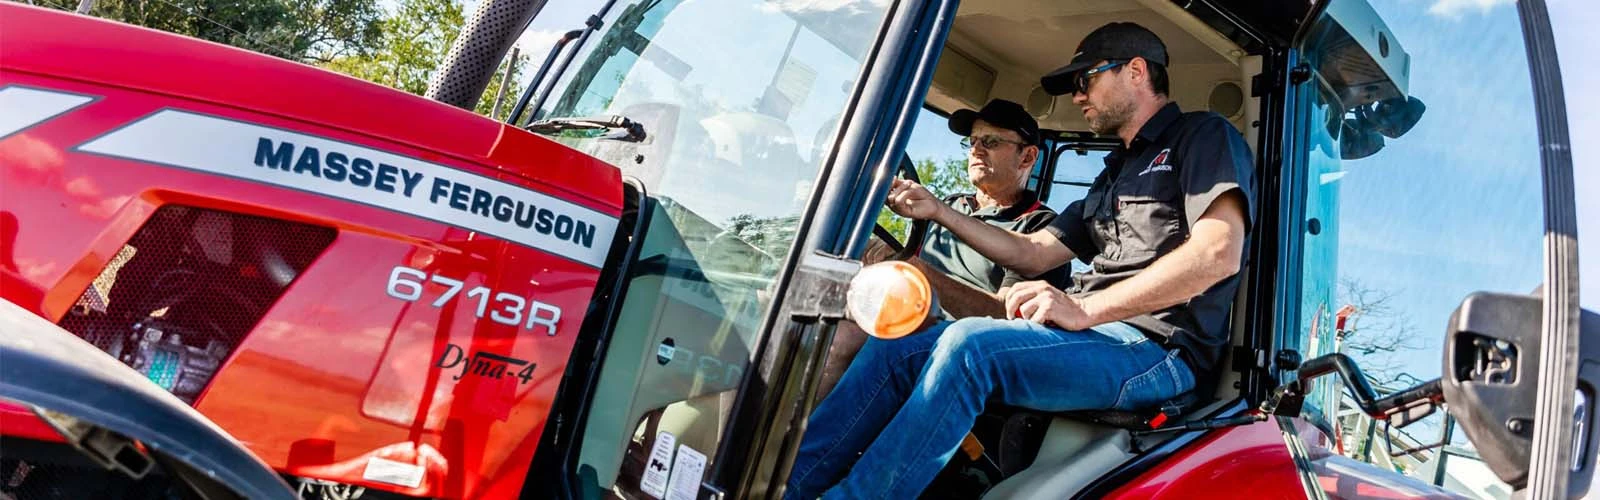 How to Train Your Farm Workers to Operate Tractors Safely